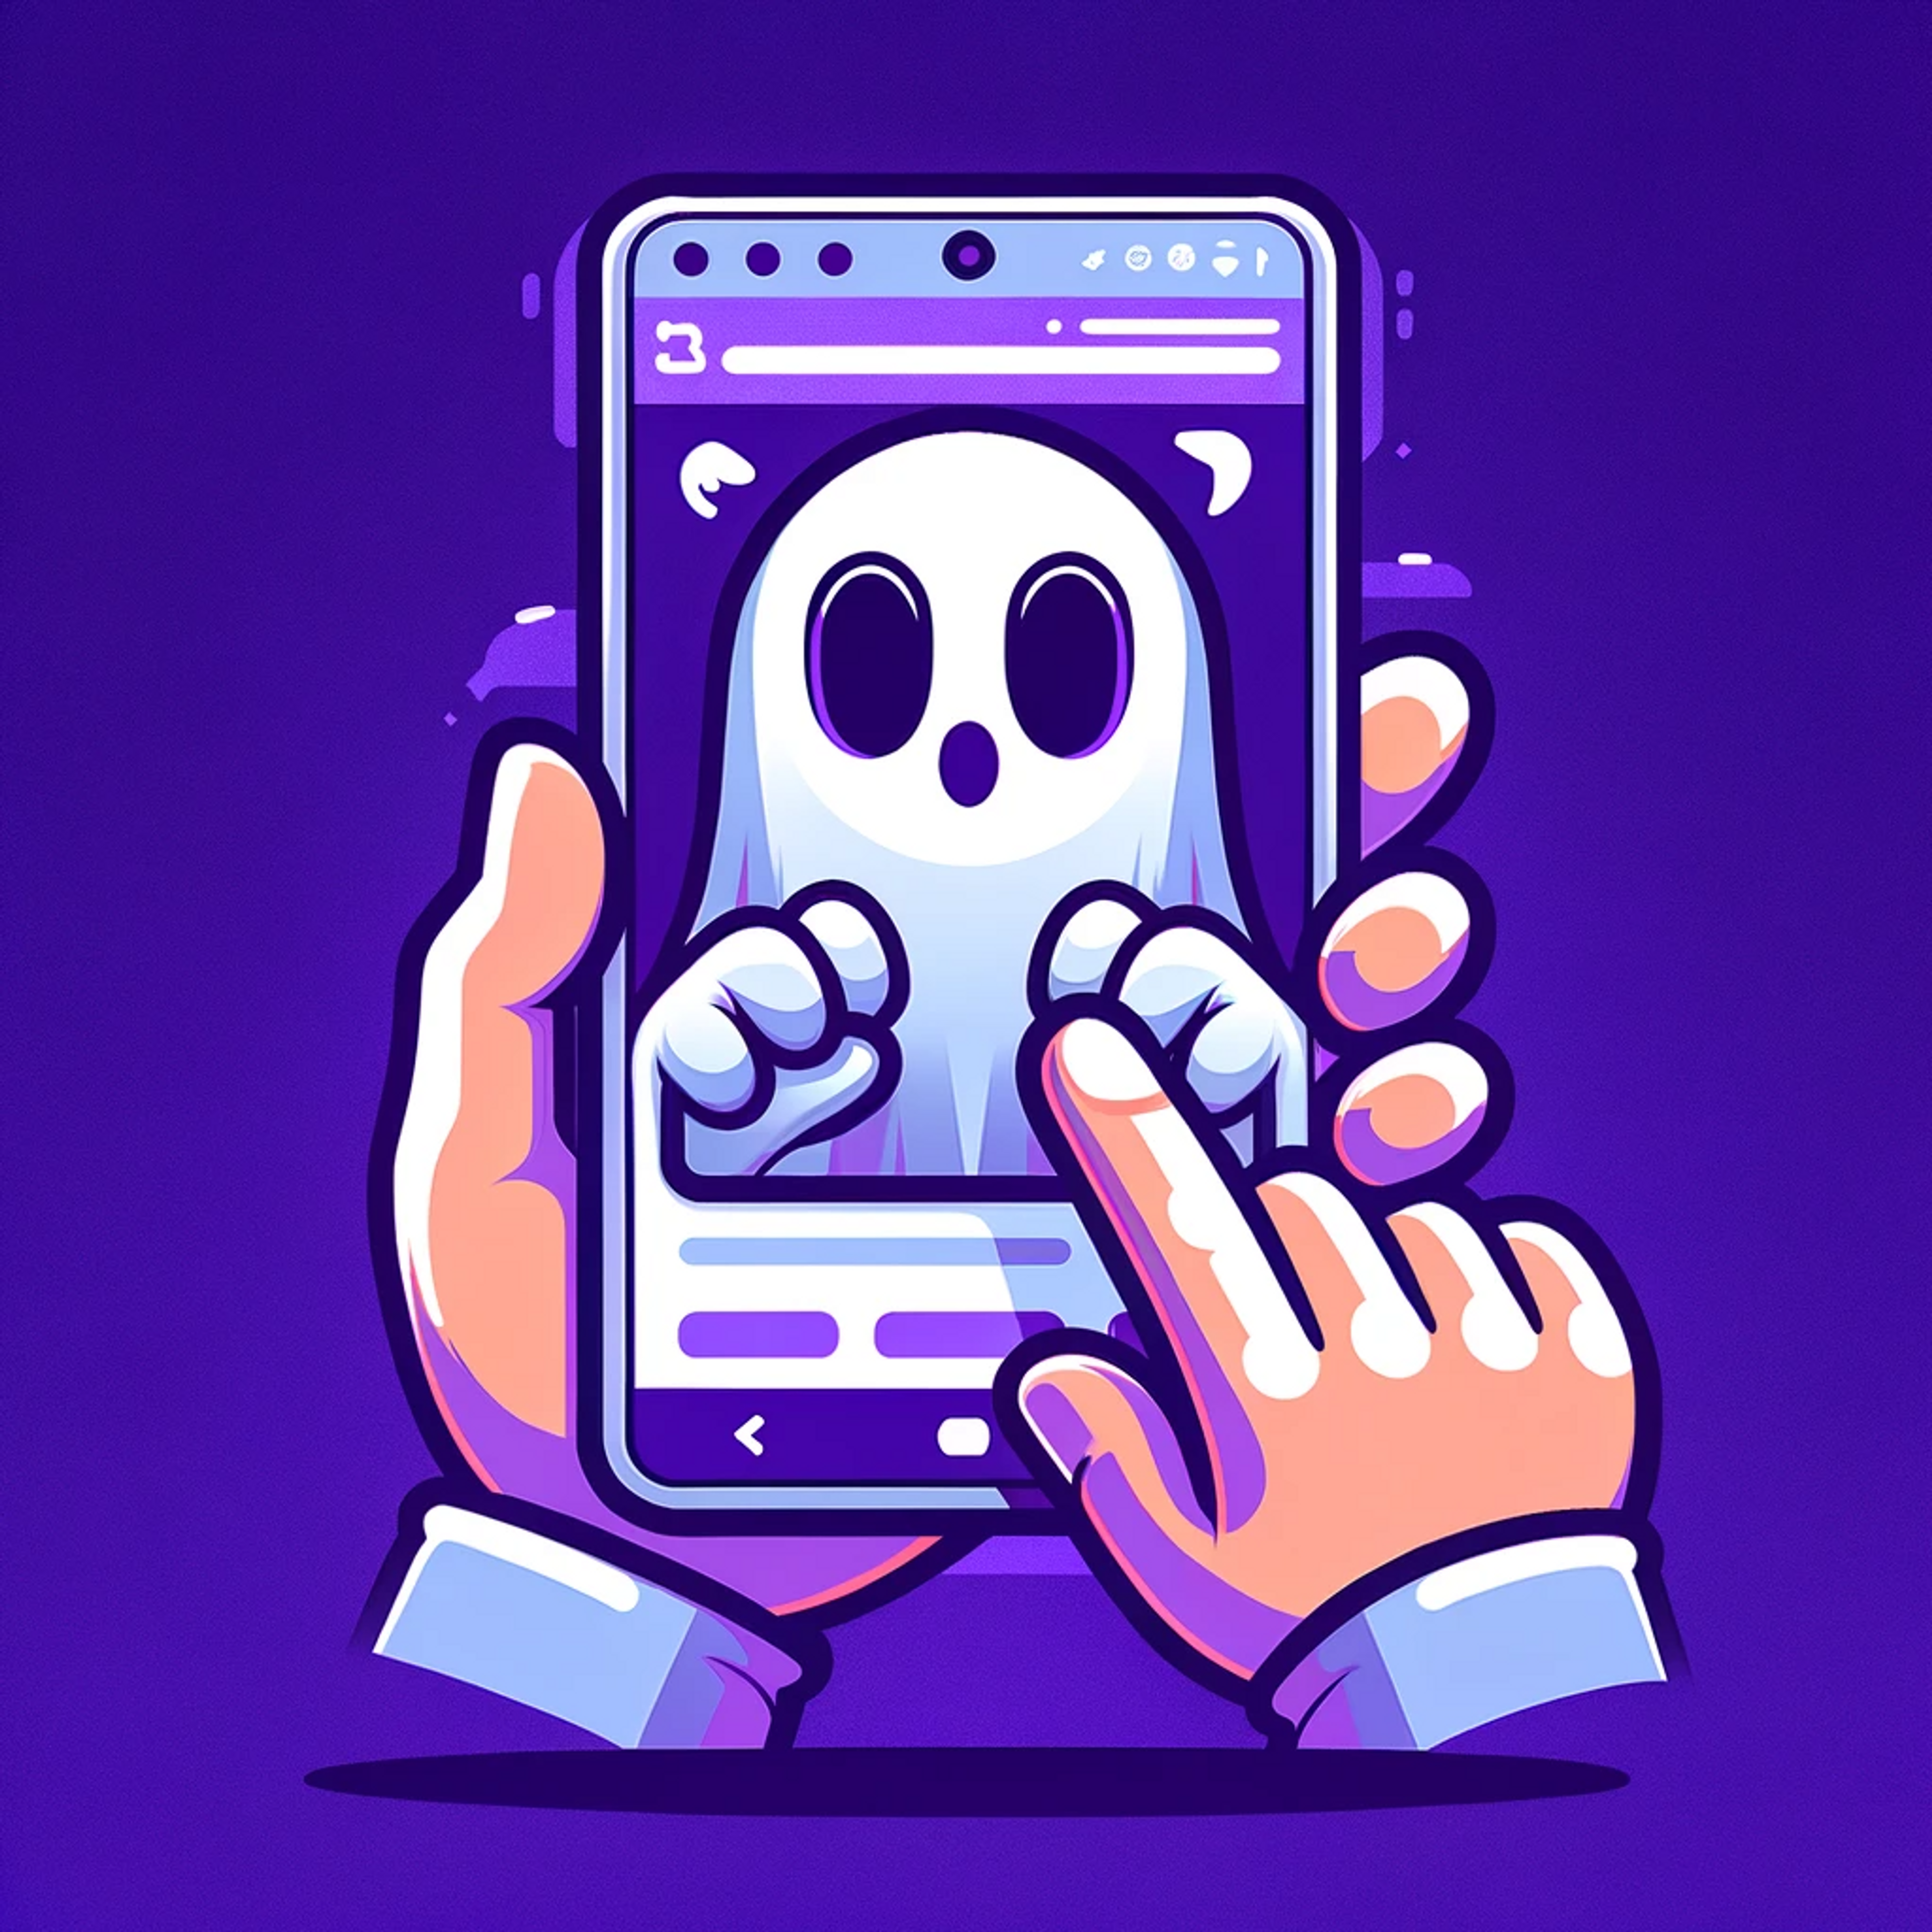 Refined cartoon ghost-like figure using a mobile device, set against a purple background, emphasizing the importance of mobile responsiveness for small businesses.